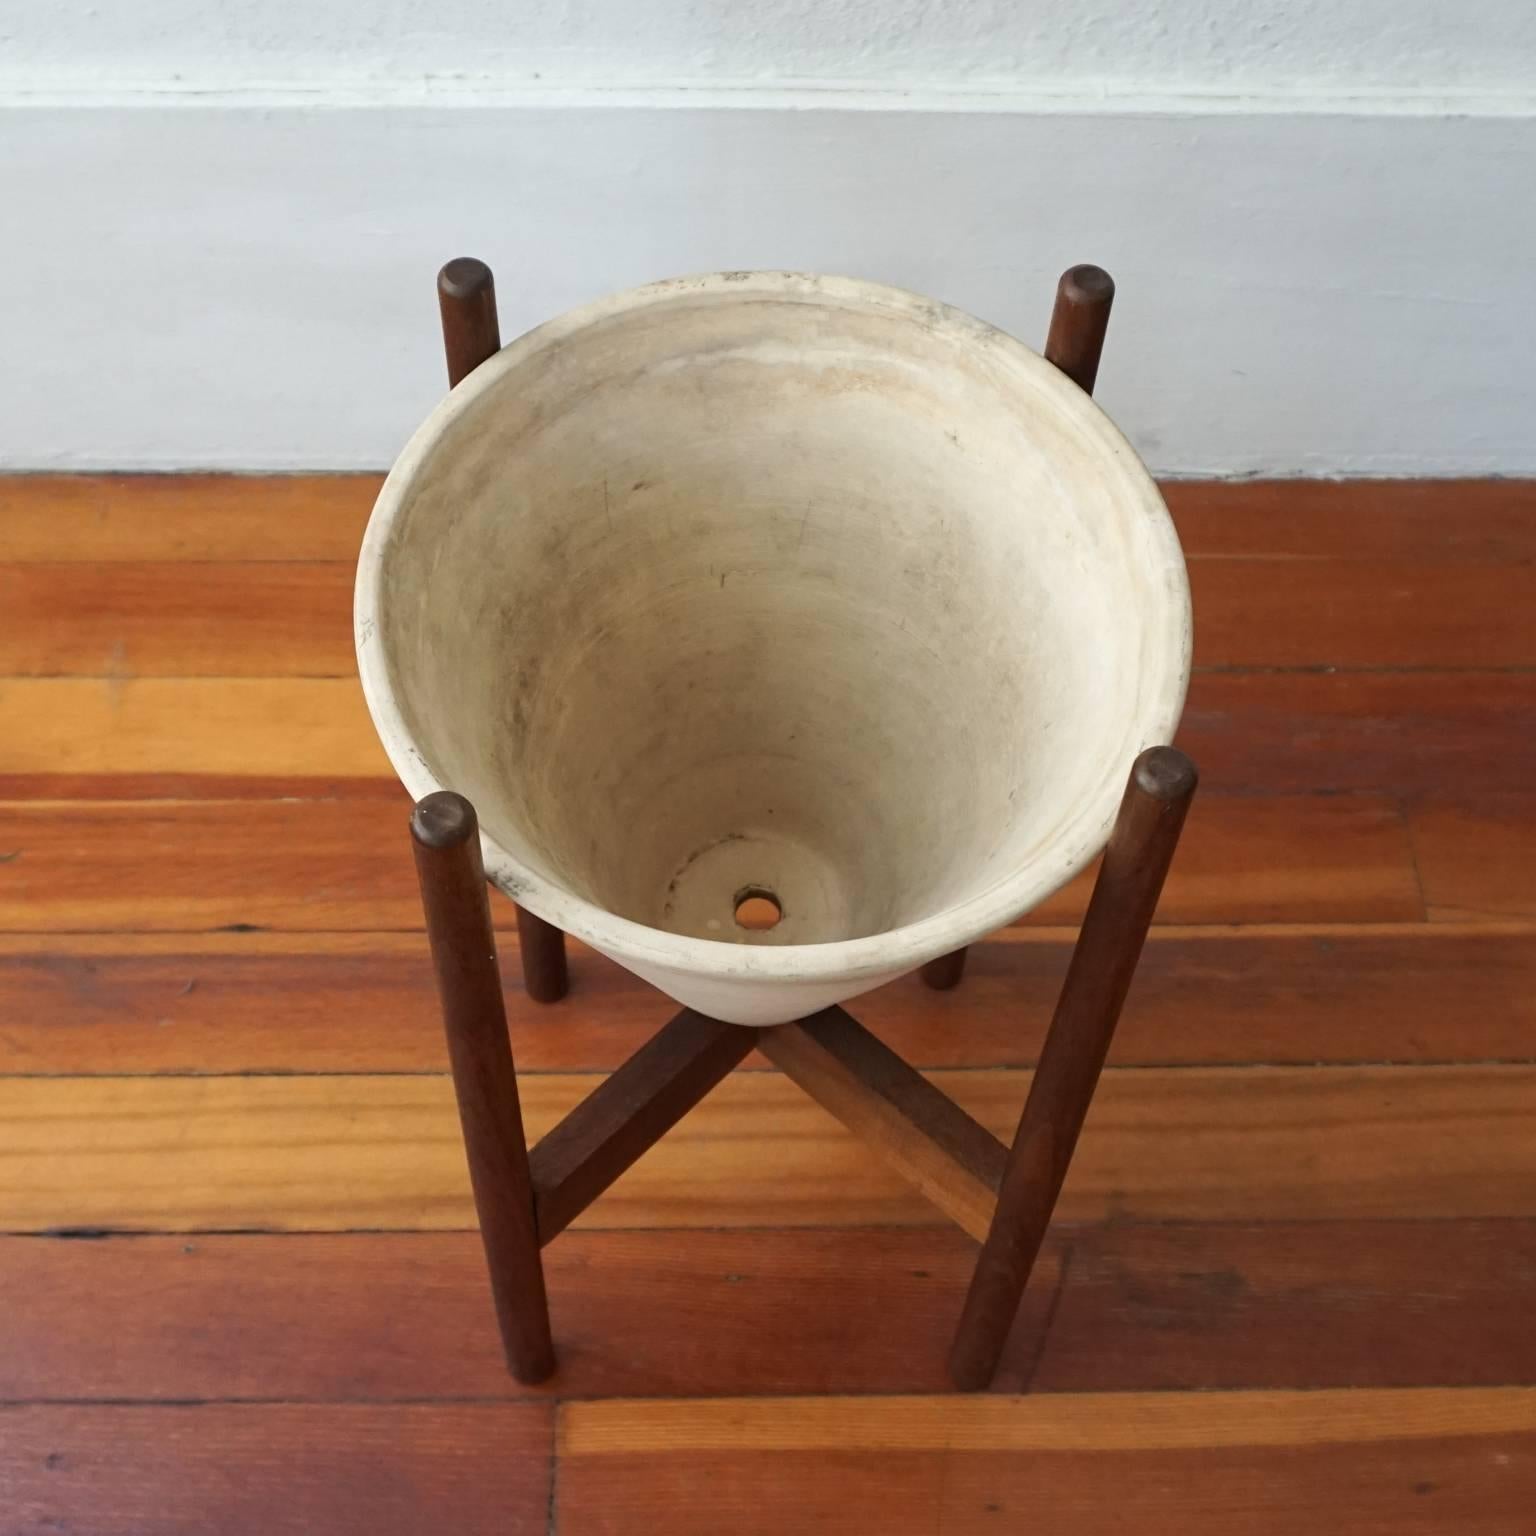 Mid-20th Century La Gardo Tackett for Architectural Pottery Cone Planter with Wood Stand